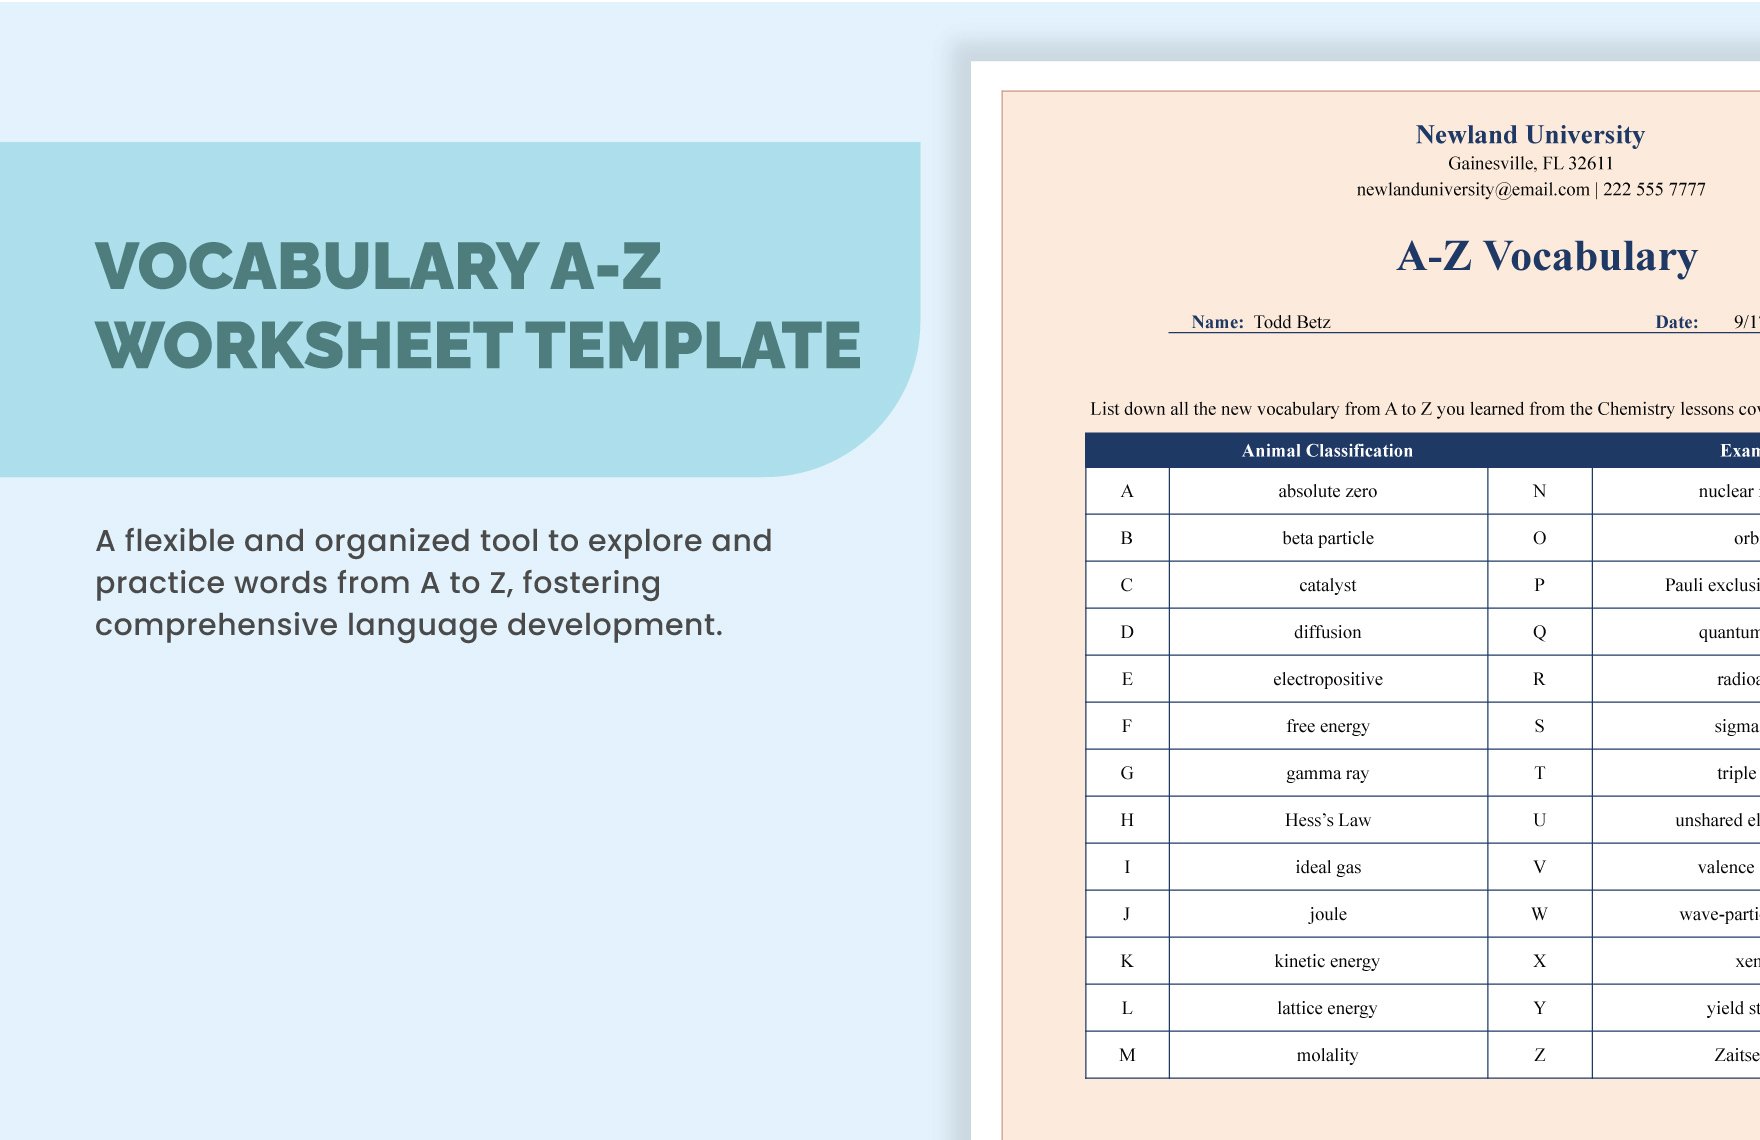 Vocabulary A-Z Worksheet Template in Excel, Google Sheets